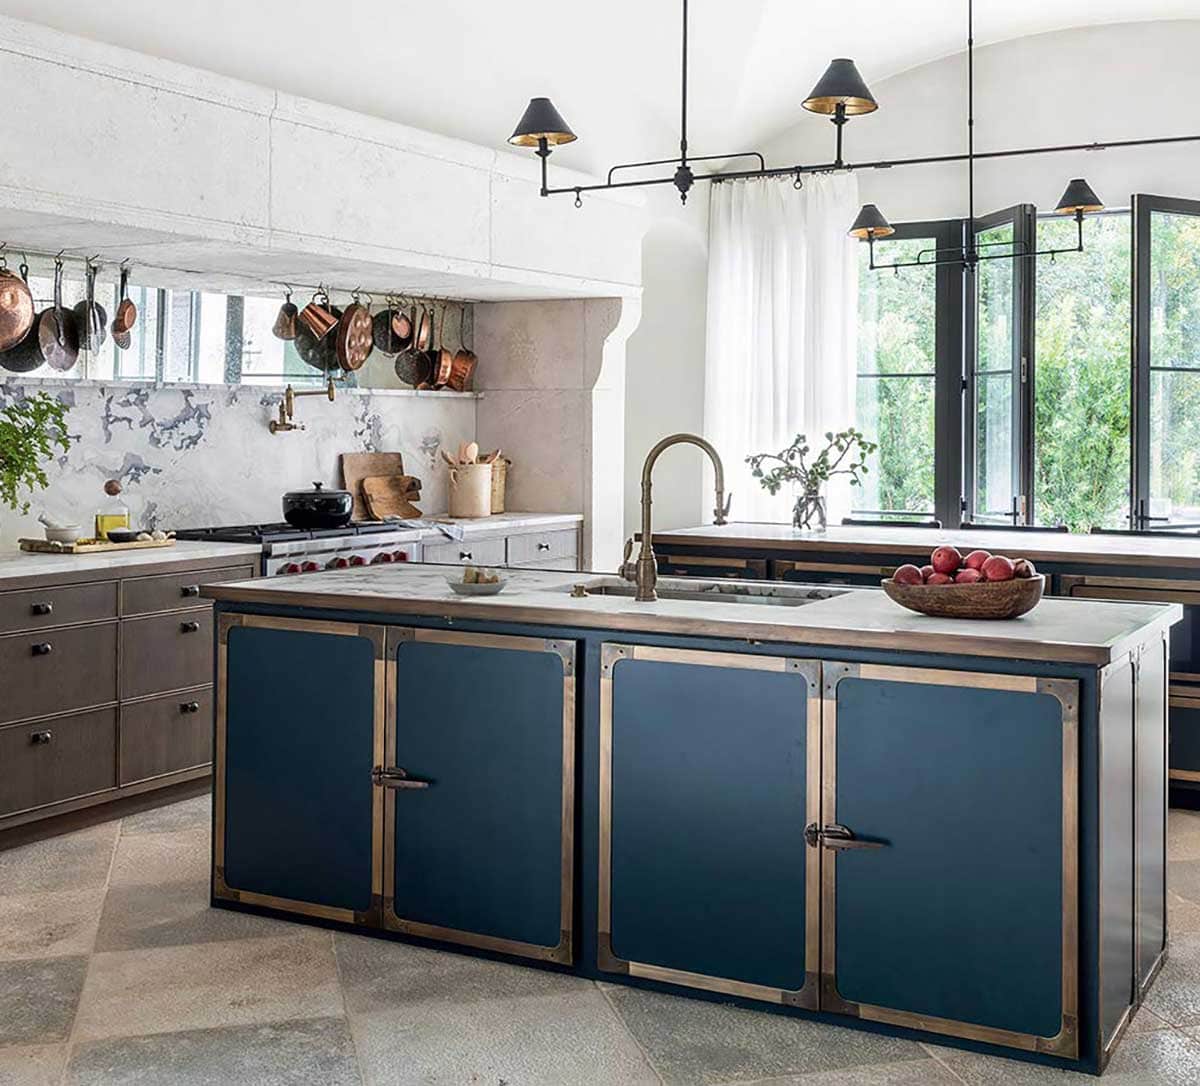 Eclectic Kitchens + A Great Design Book